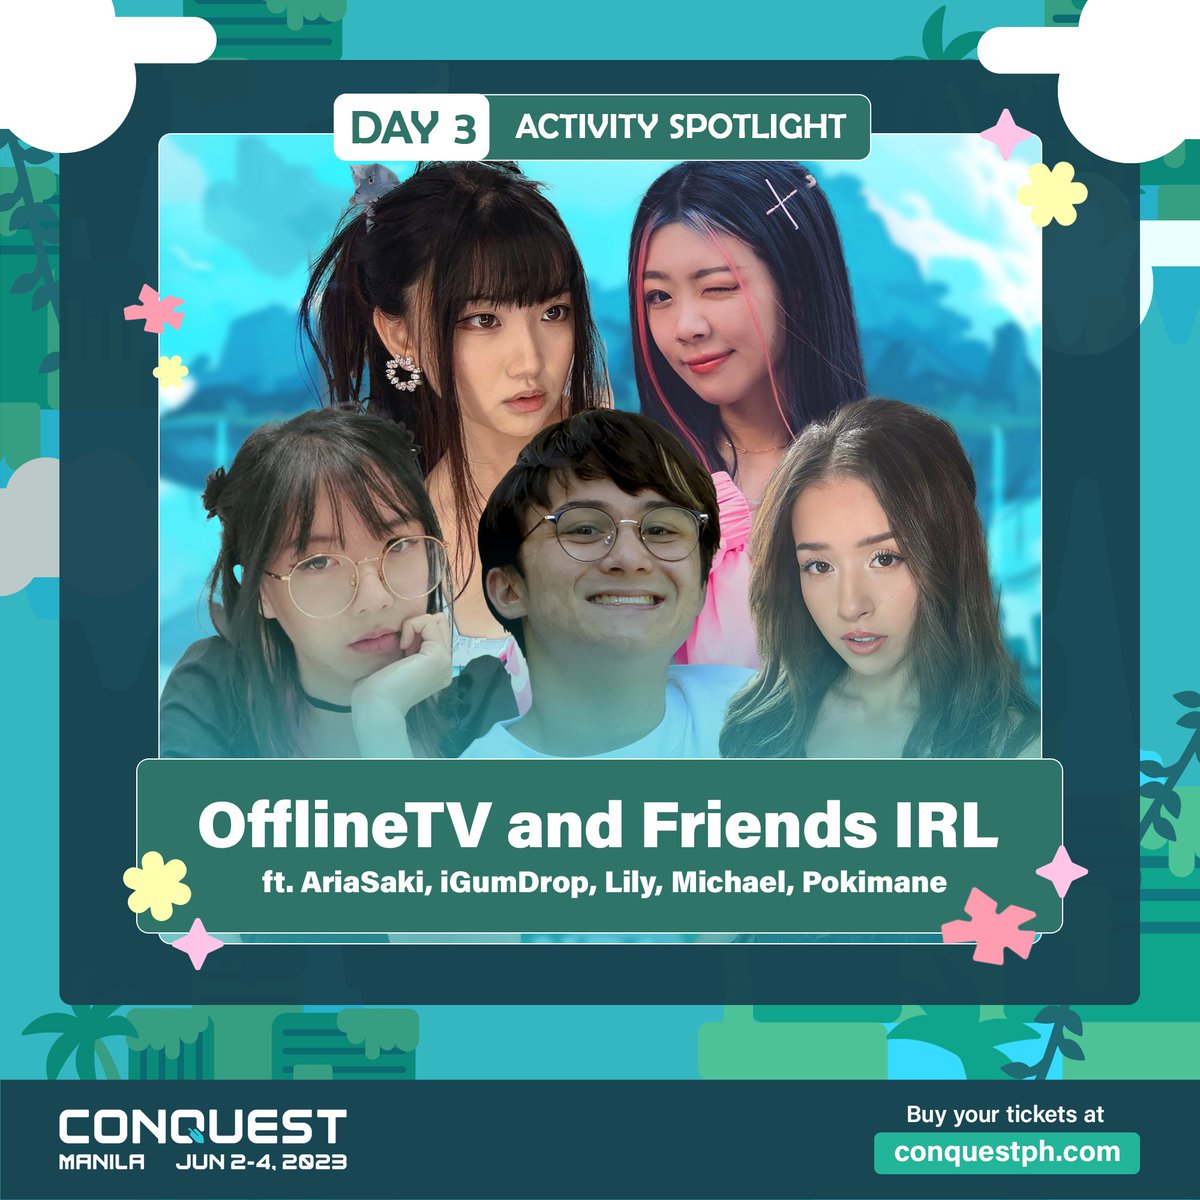 Day 3 attendees are in for a treat! ✨

@AriaSaki, @iGumdrop, @LilyPichu, @michaelreeves and @pokimanelol will be taking over the #CONQuest2023 stage for the OfflineTV and Friends IRL segment. 📺

What do you think will they be doing on stage? 🤔🤔

#SeeYouInTheSkies ☁️